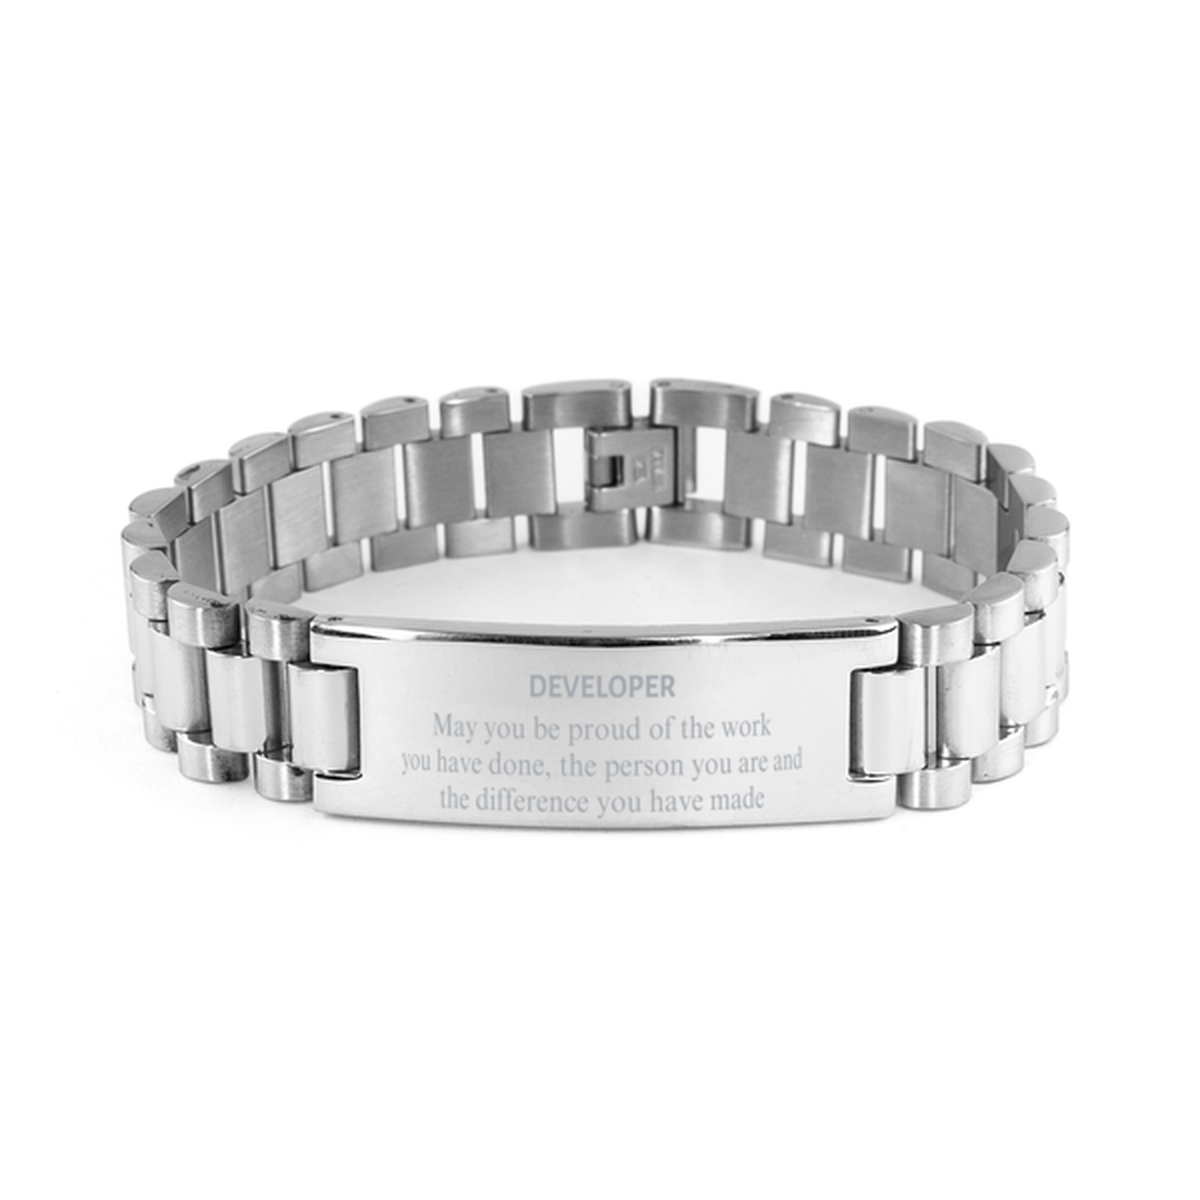 Developer May you be proud of the work you have done, Retirement Developer Ladder Stainless Steel Bracelet for Colleague Appreciation Gifts Amazing for Developer